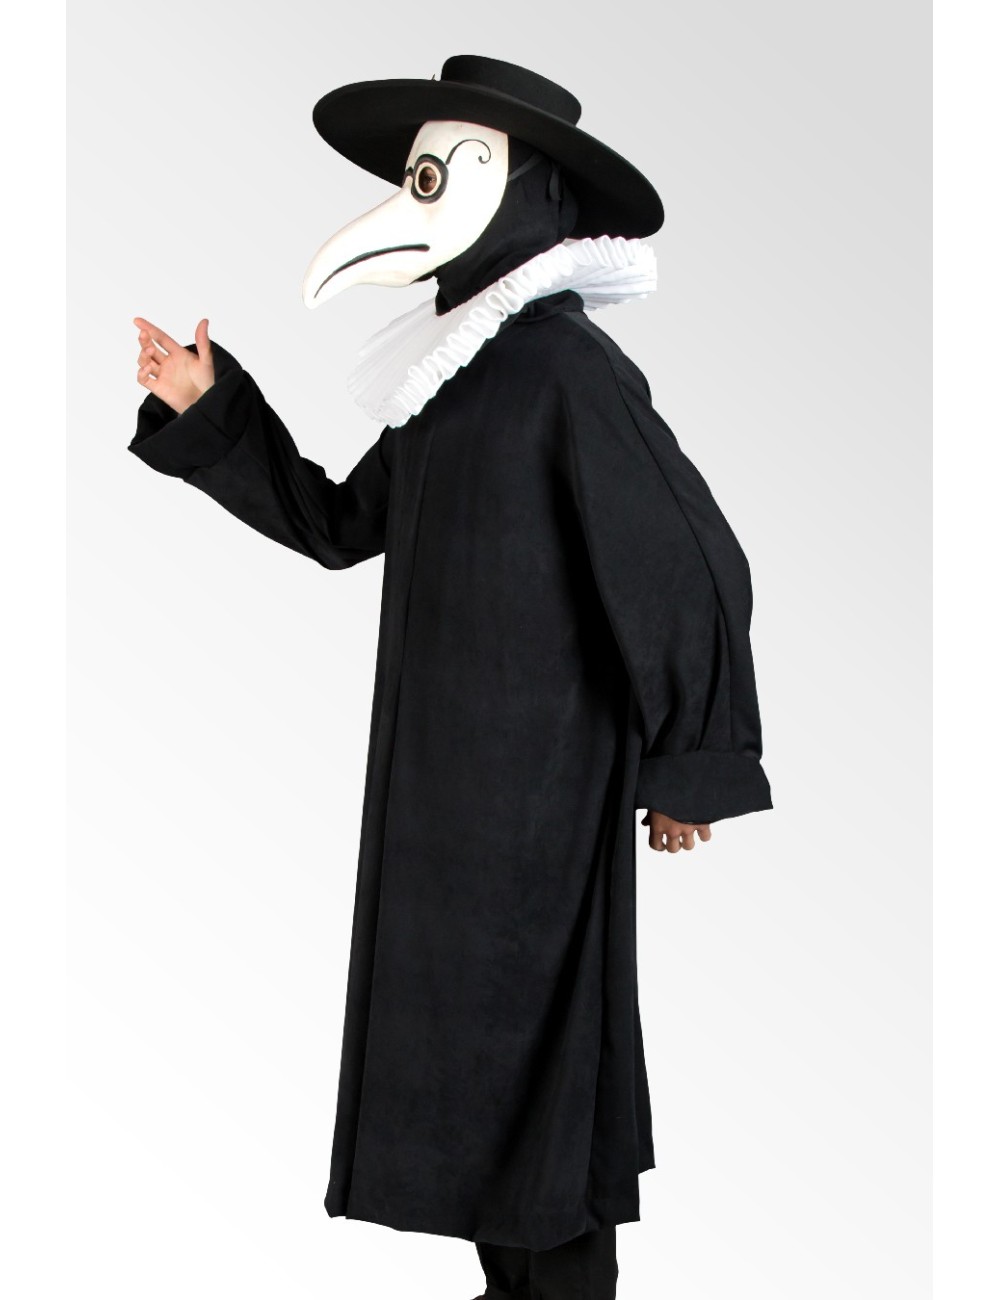 THE PLAGUE DOCTOR IS HERE & HE BROKE IN!!